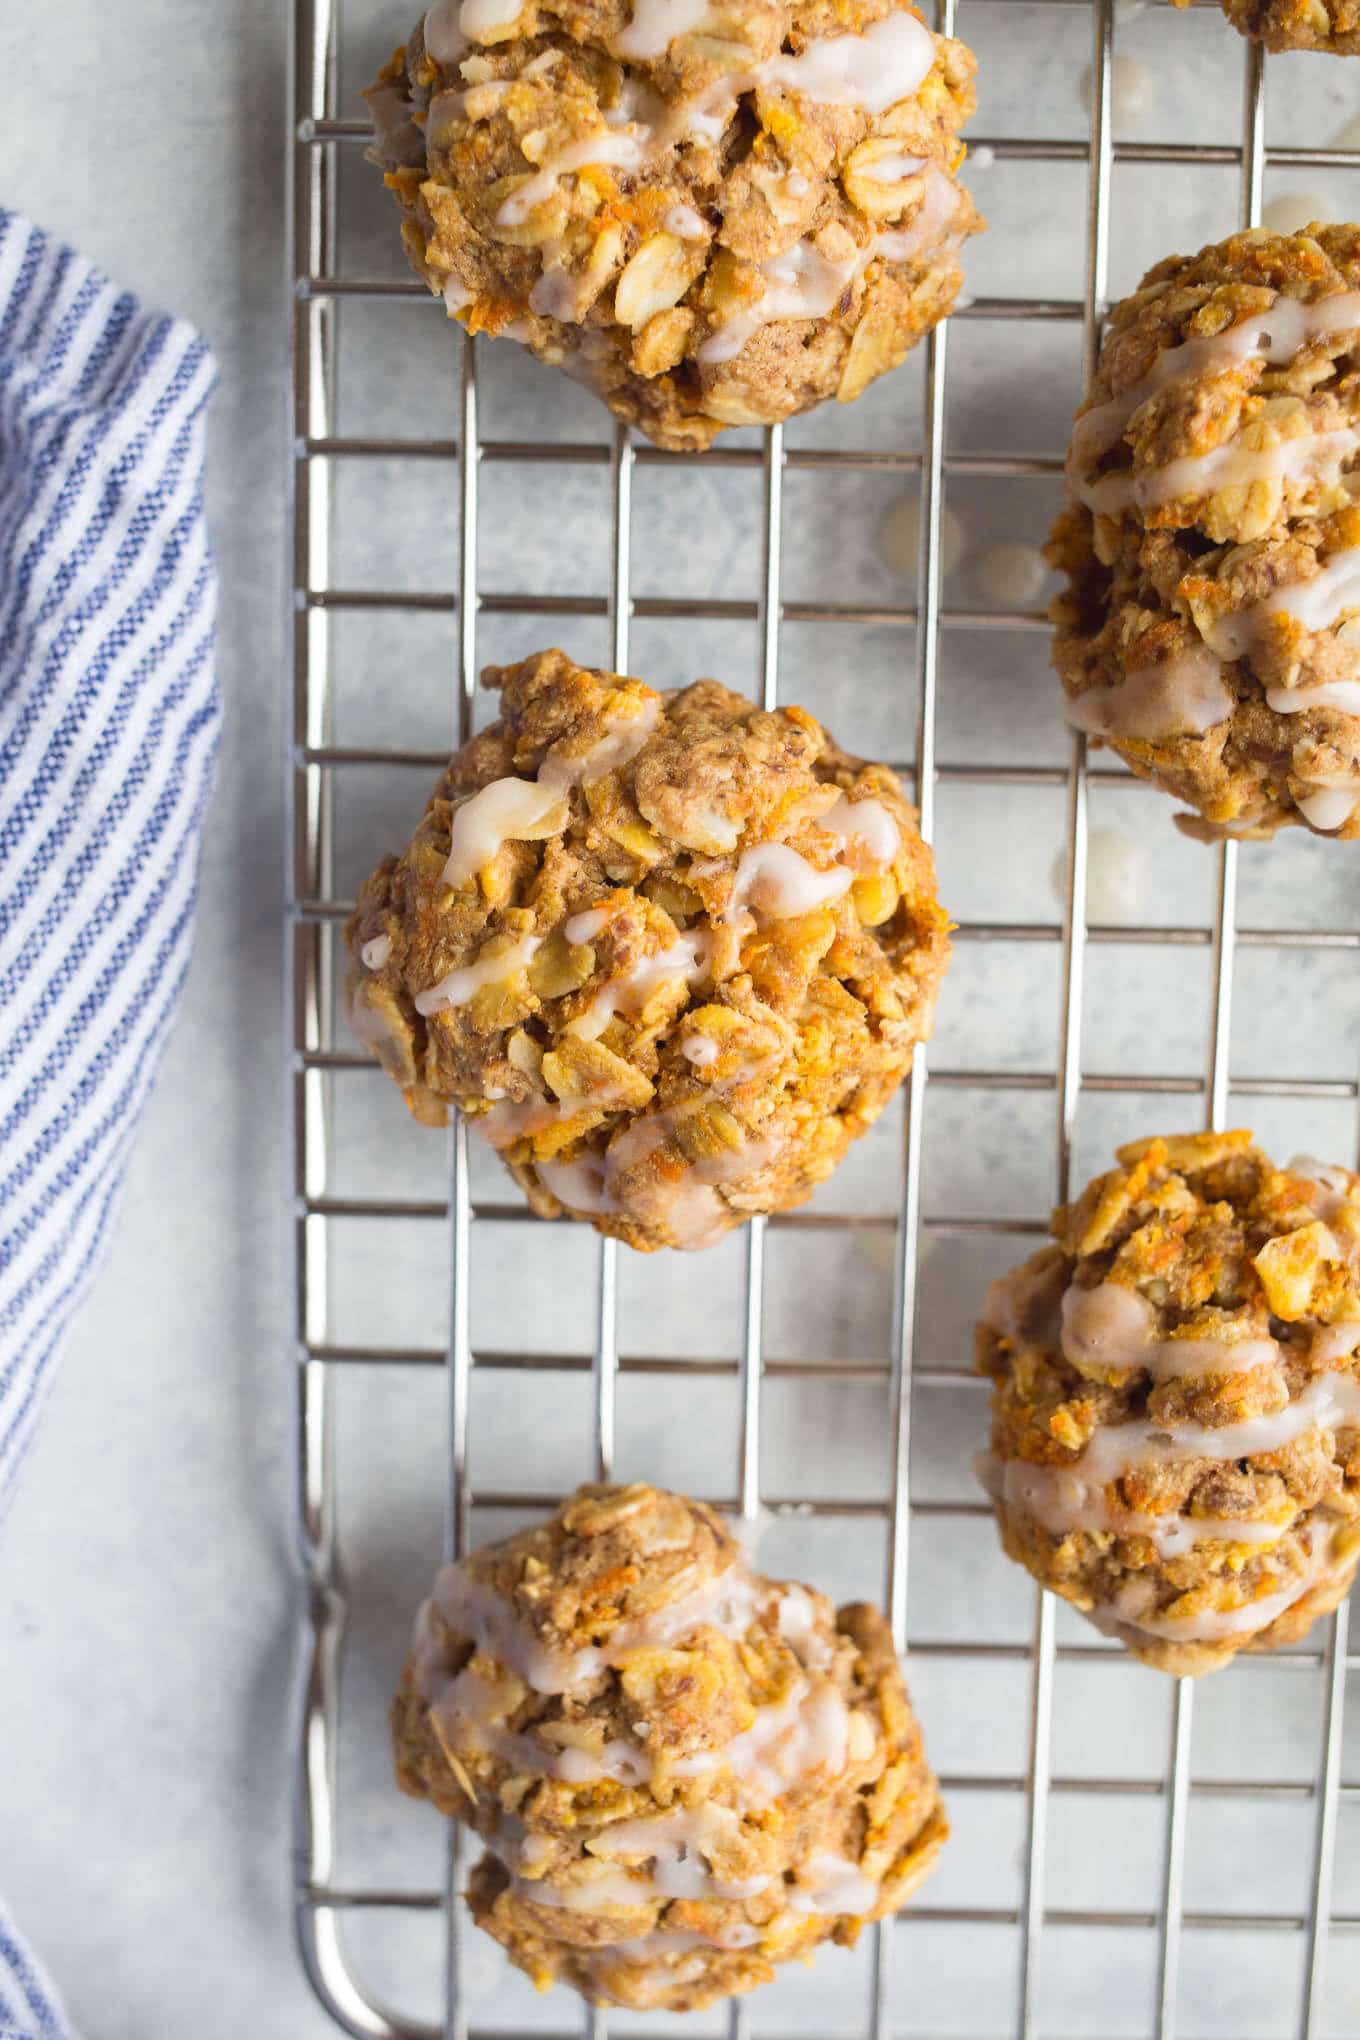 Gluten-Free Carrot Oatmeal Cookies are full of wholesome oats, carrots, flaxseeds, and walnuts for a deliciously healthy treat. Vegan, refined sugar-free. 